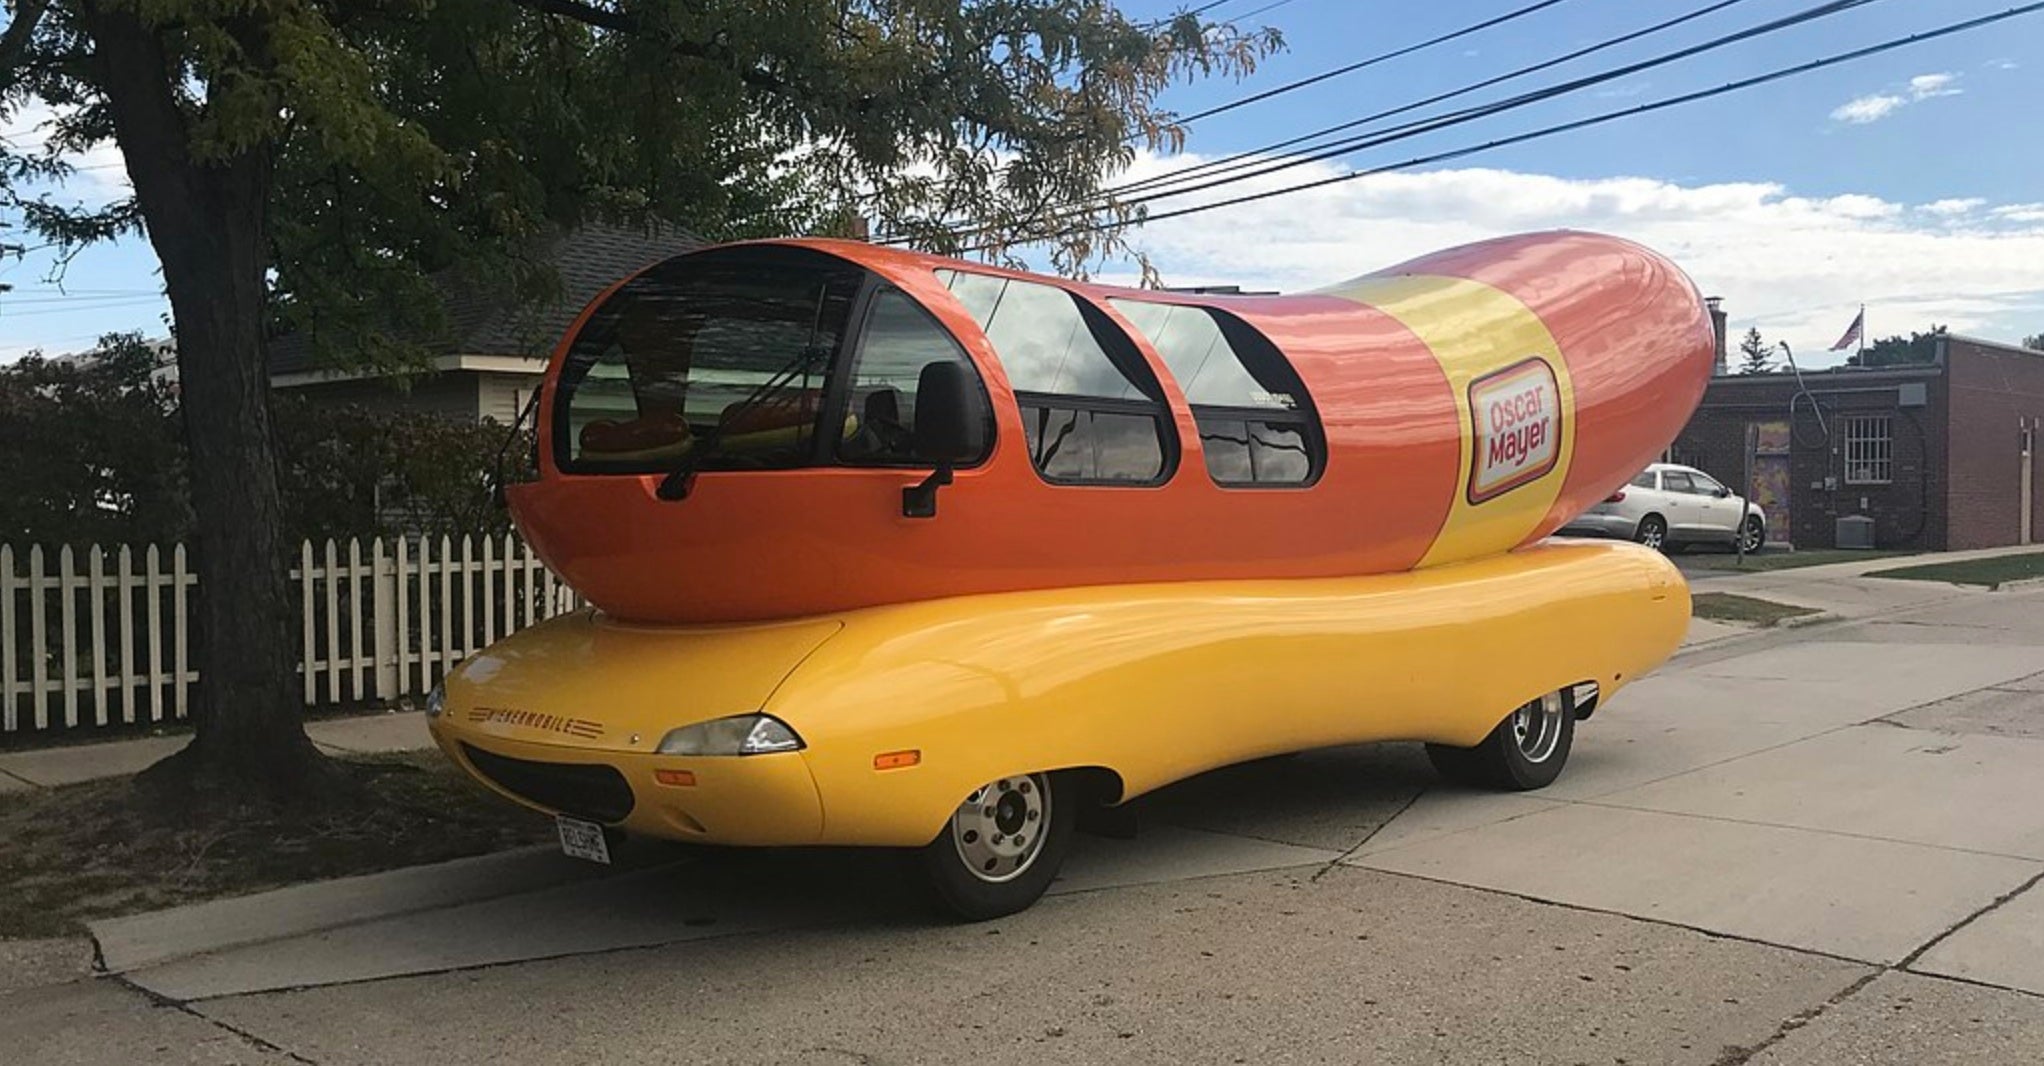 Oscar Mayer Wienermobile Heads To The Metaverse Along With NFTs: Here Are The Details